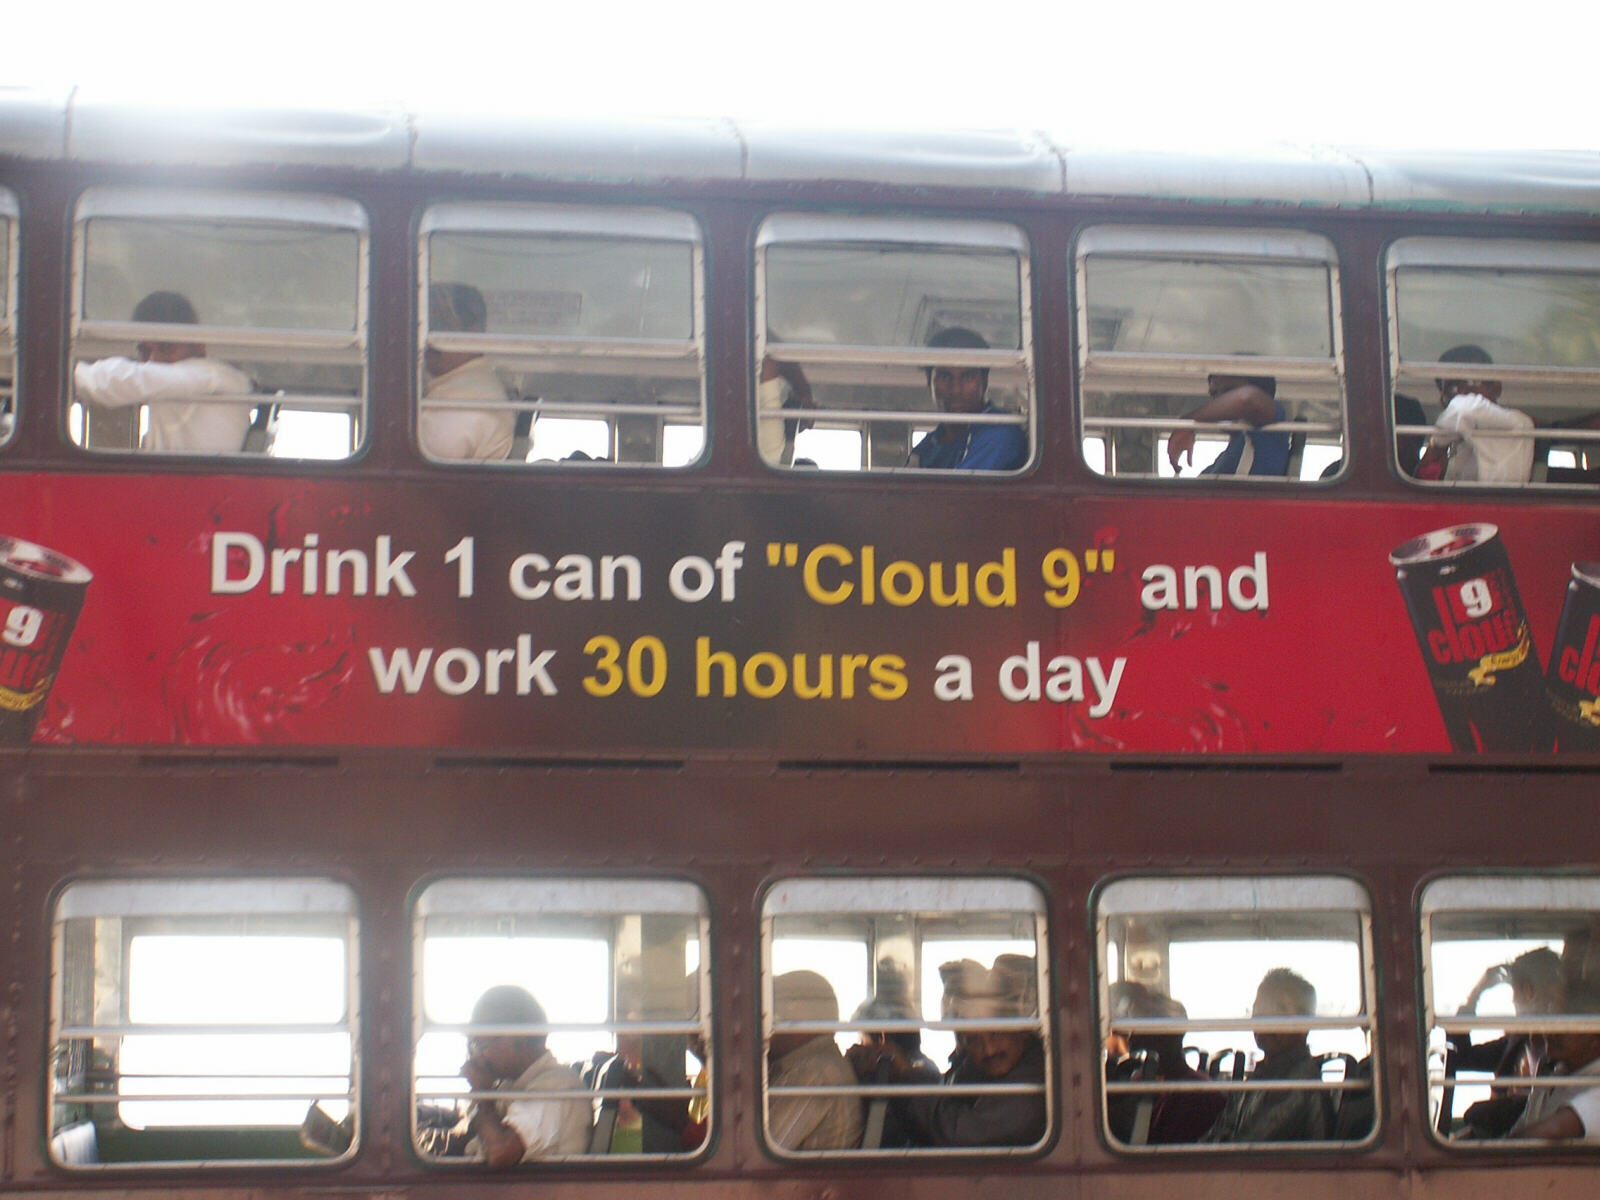 An advertisement on the side of a bus in Bombay / Mumbai